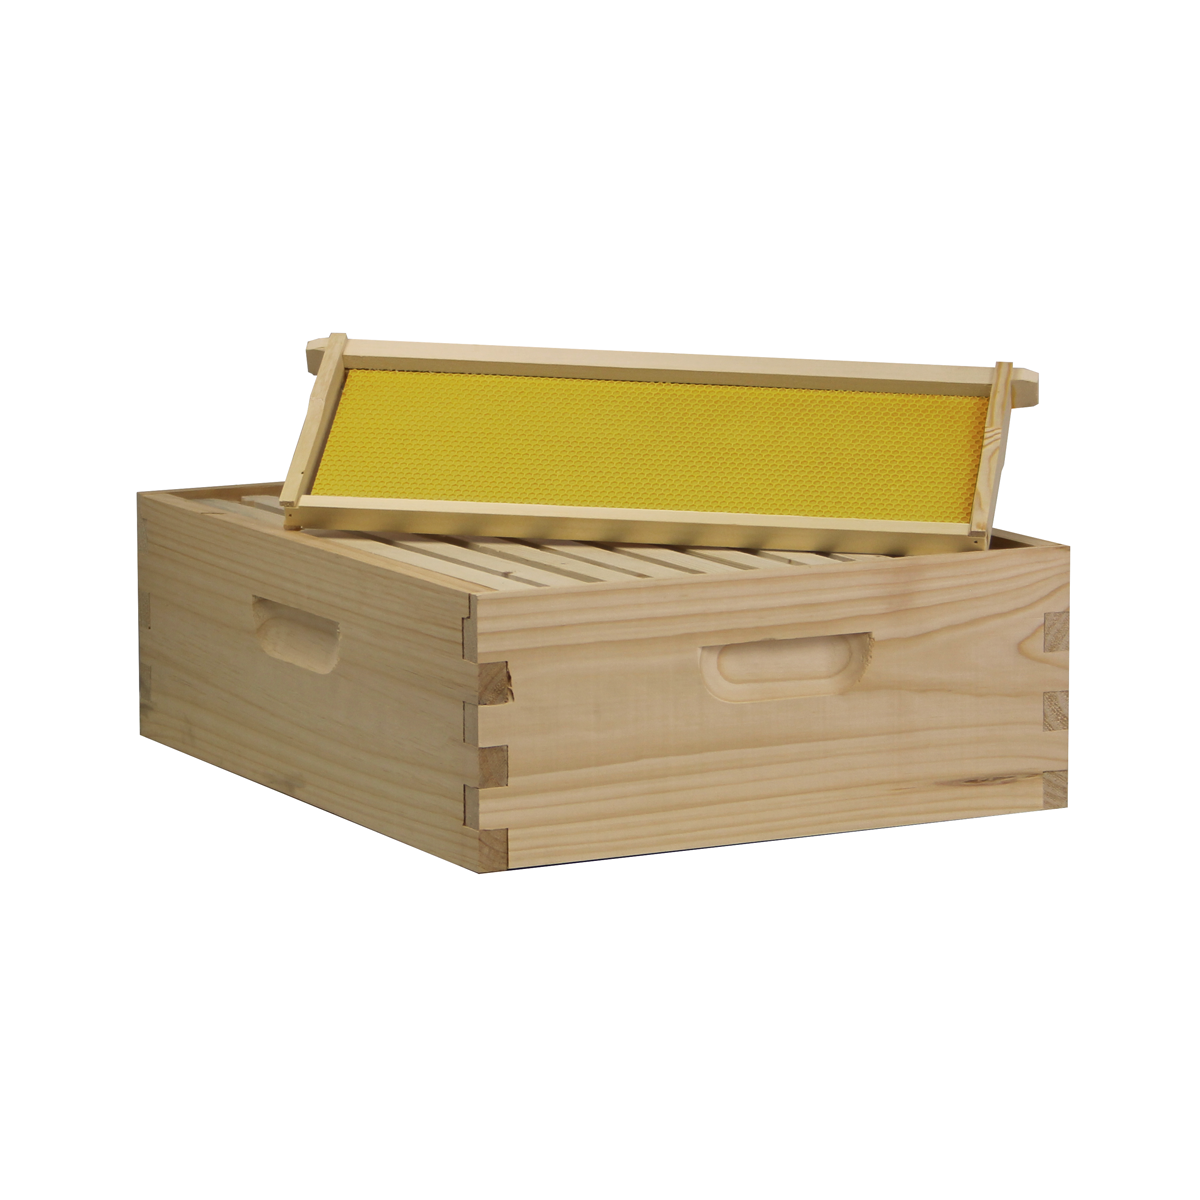 Busy Bees 'N' More Amish Made 10 Frame Medium Honey Super Box With Frames & Foundations